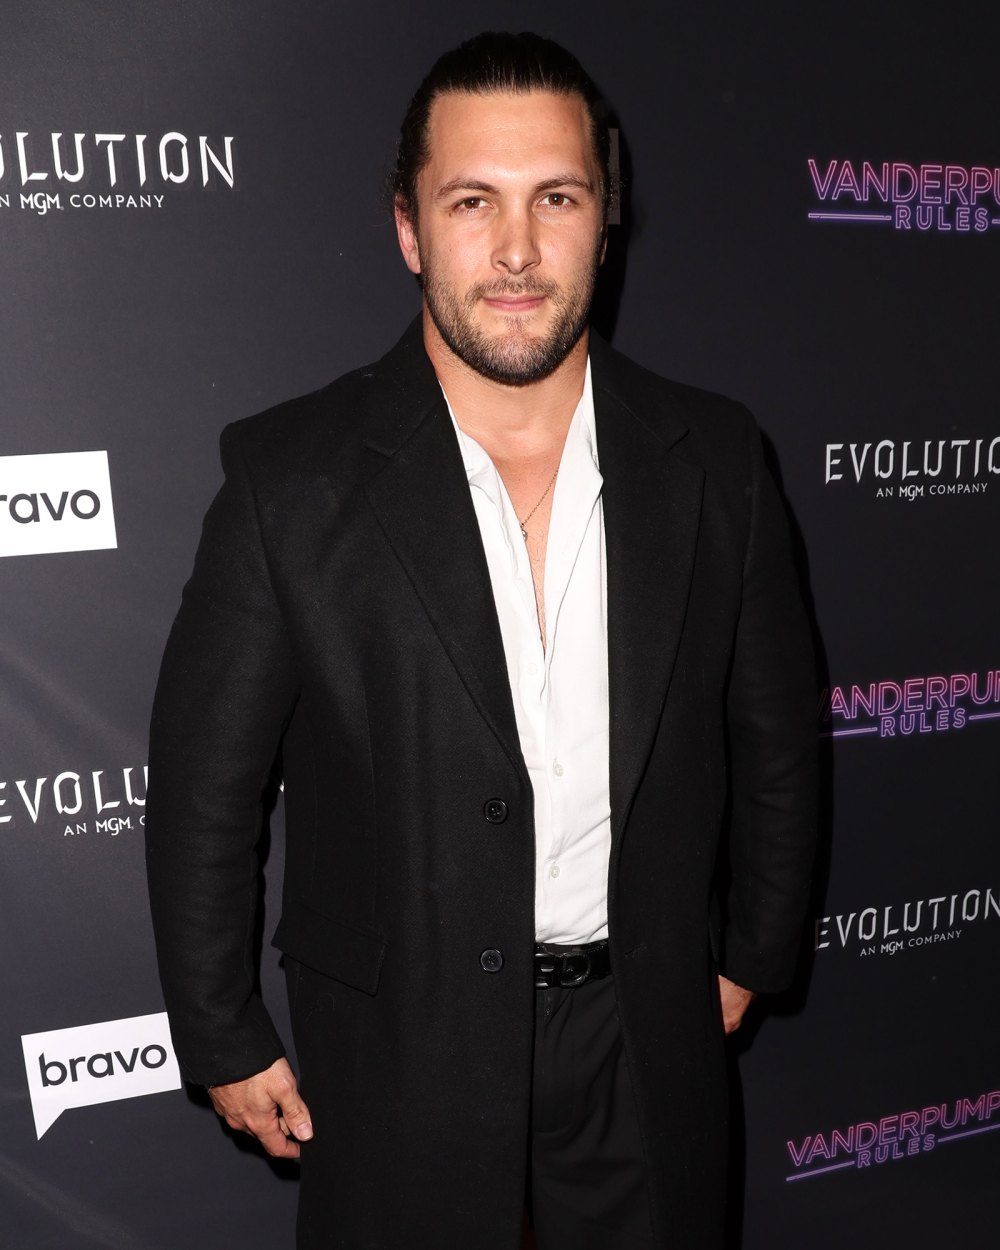 Brock Davies Believes There’s Only 1 Reason That Would Stop ‘Vanderpump Rules’ Cast From Returning for Season 11 After Reunion Bombshell